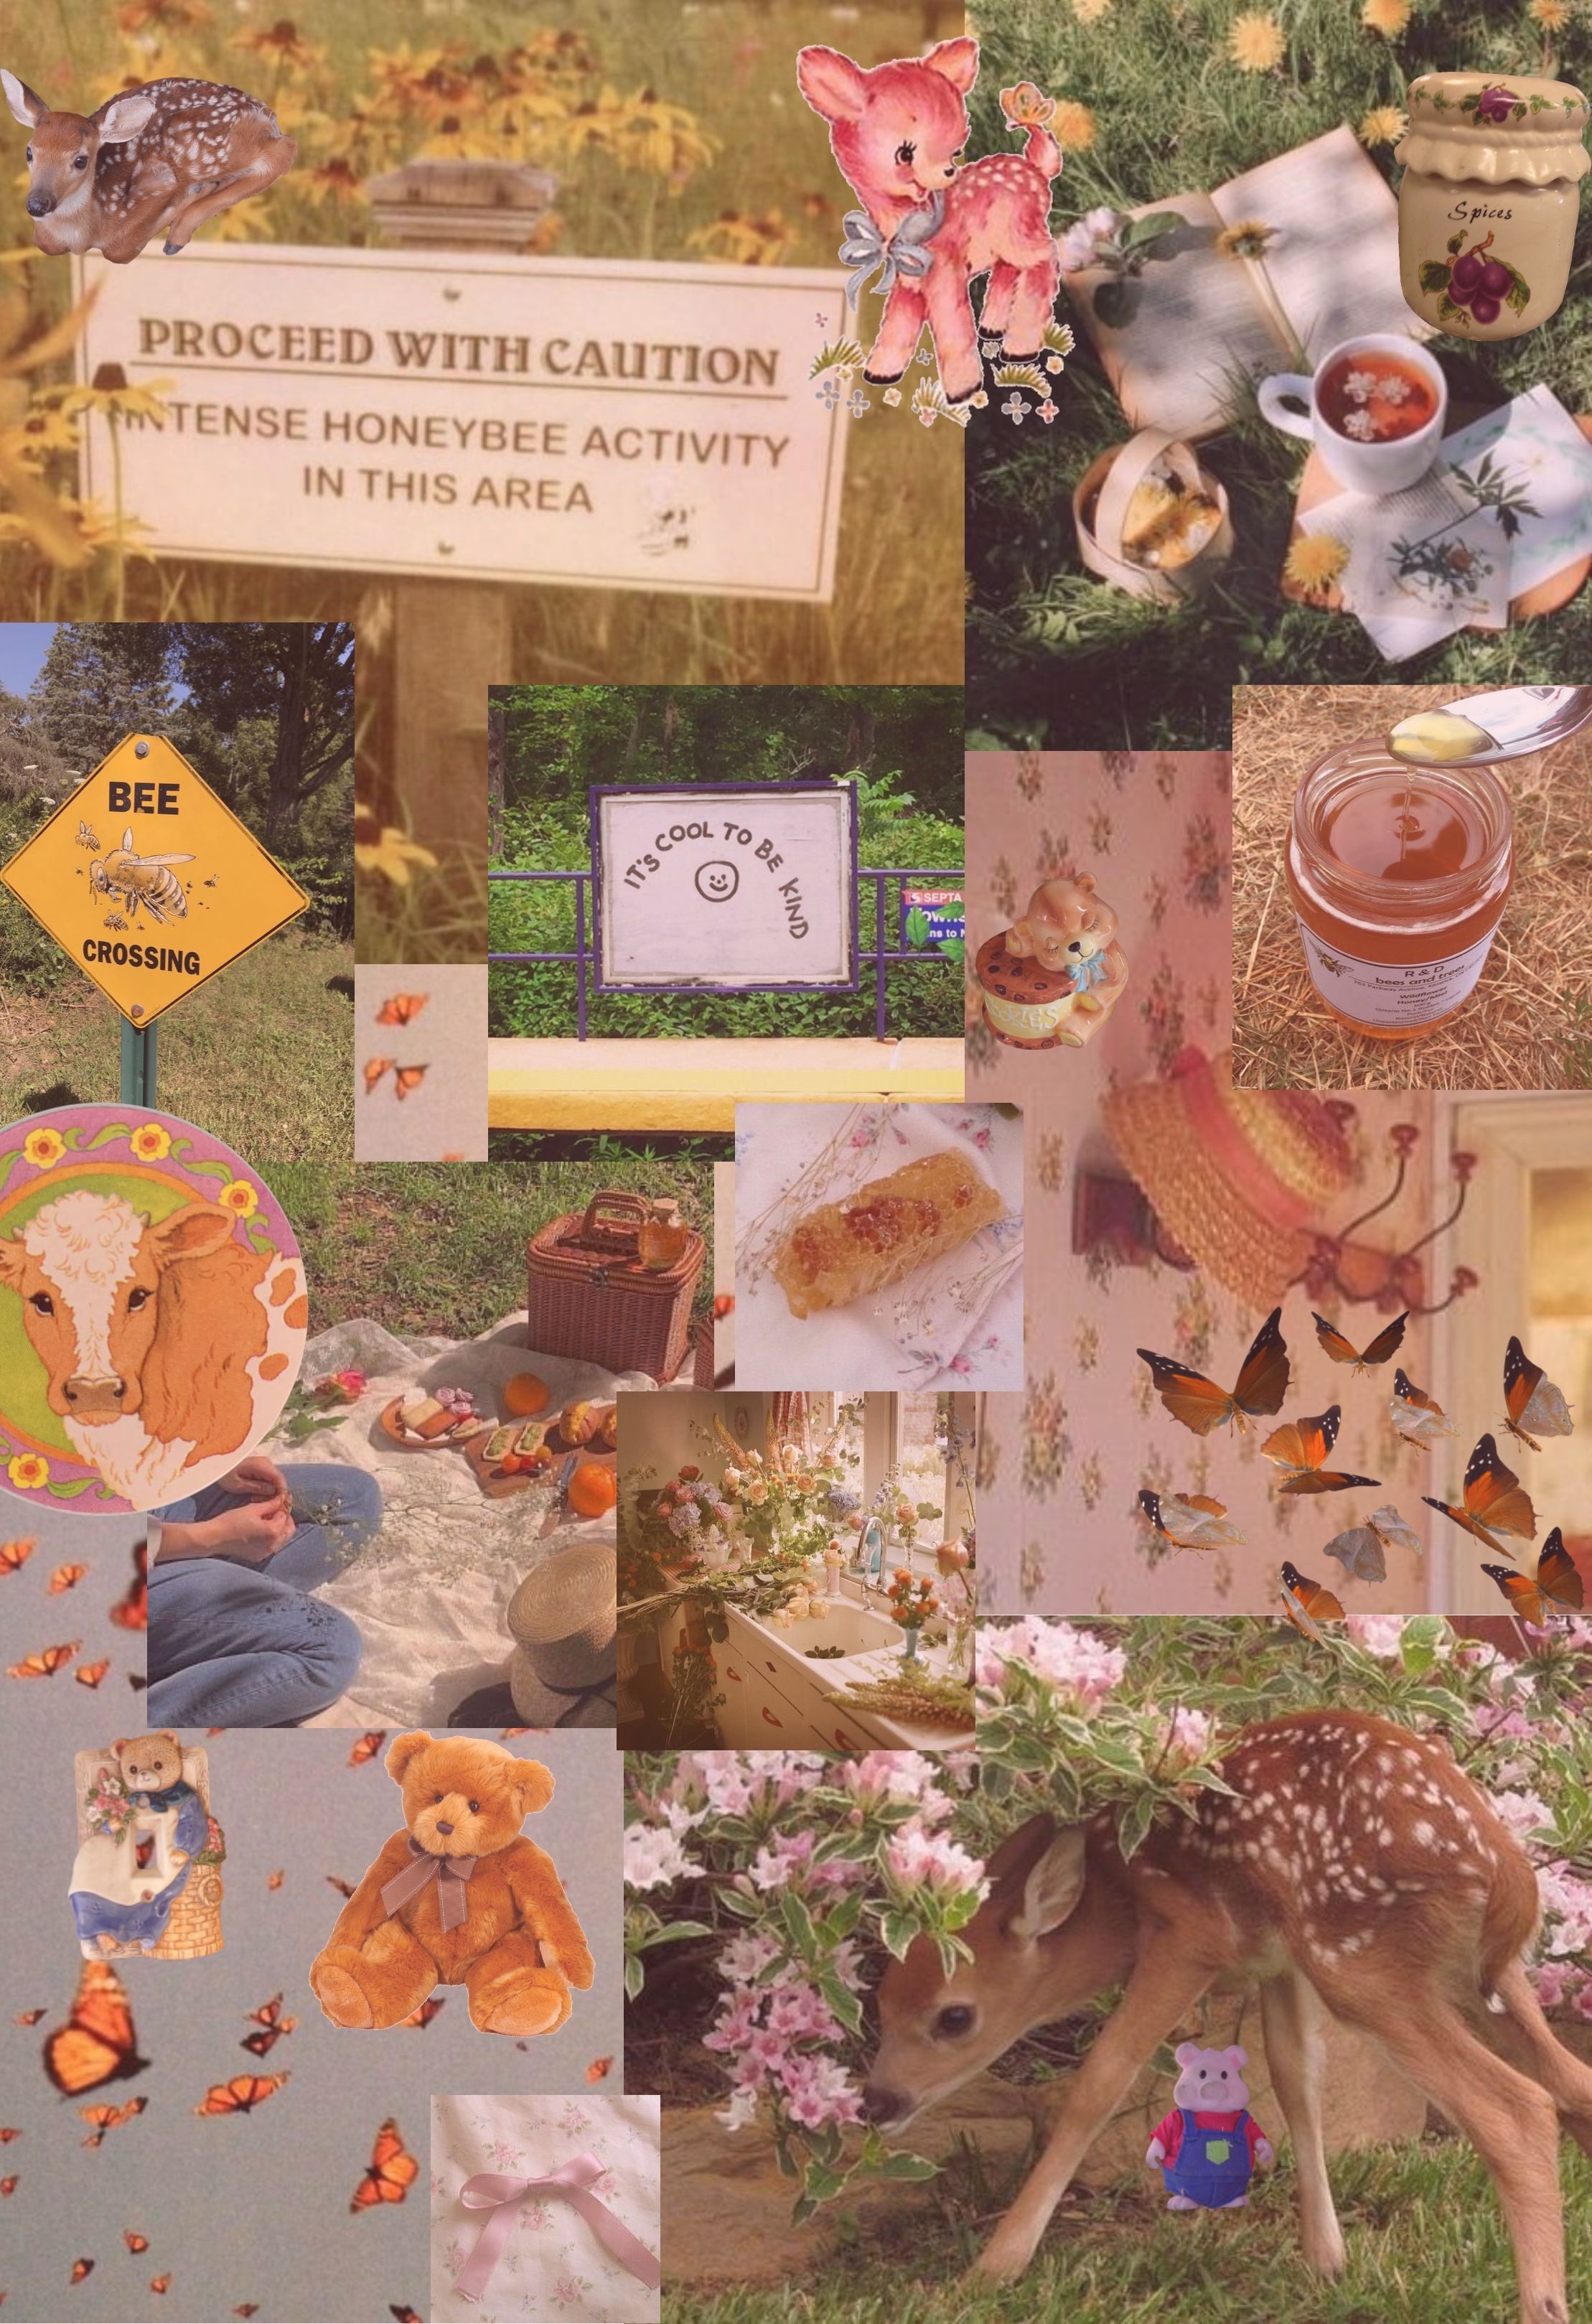 A collage of various photos of cute animals, flowers, and food. - Goblincore, cottagecore